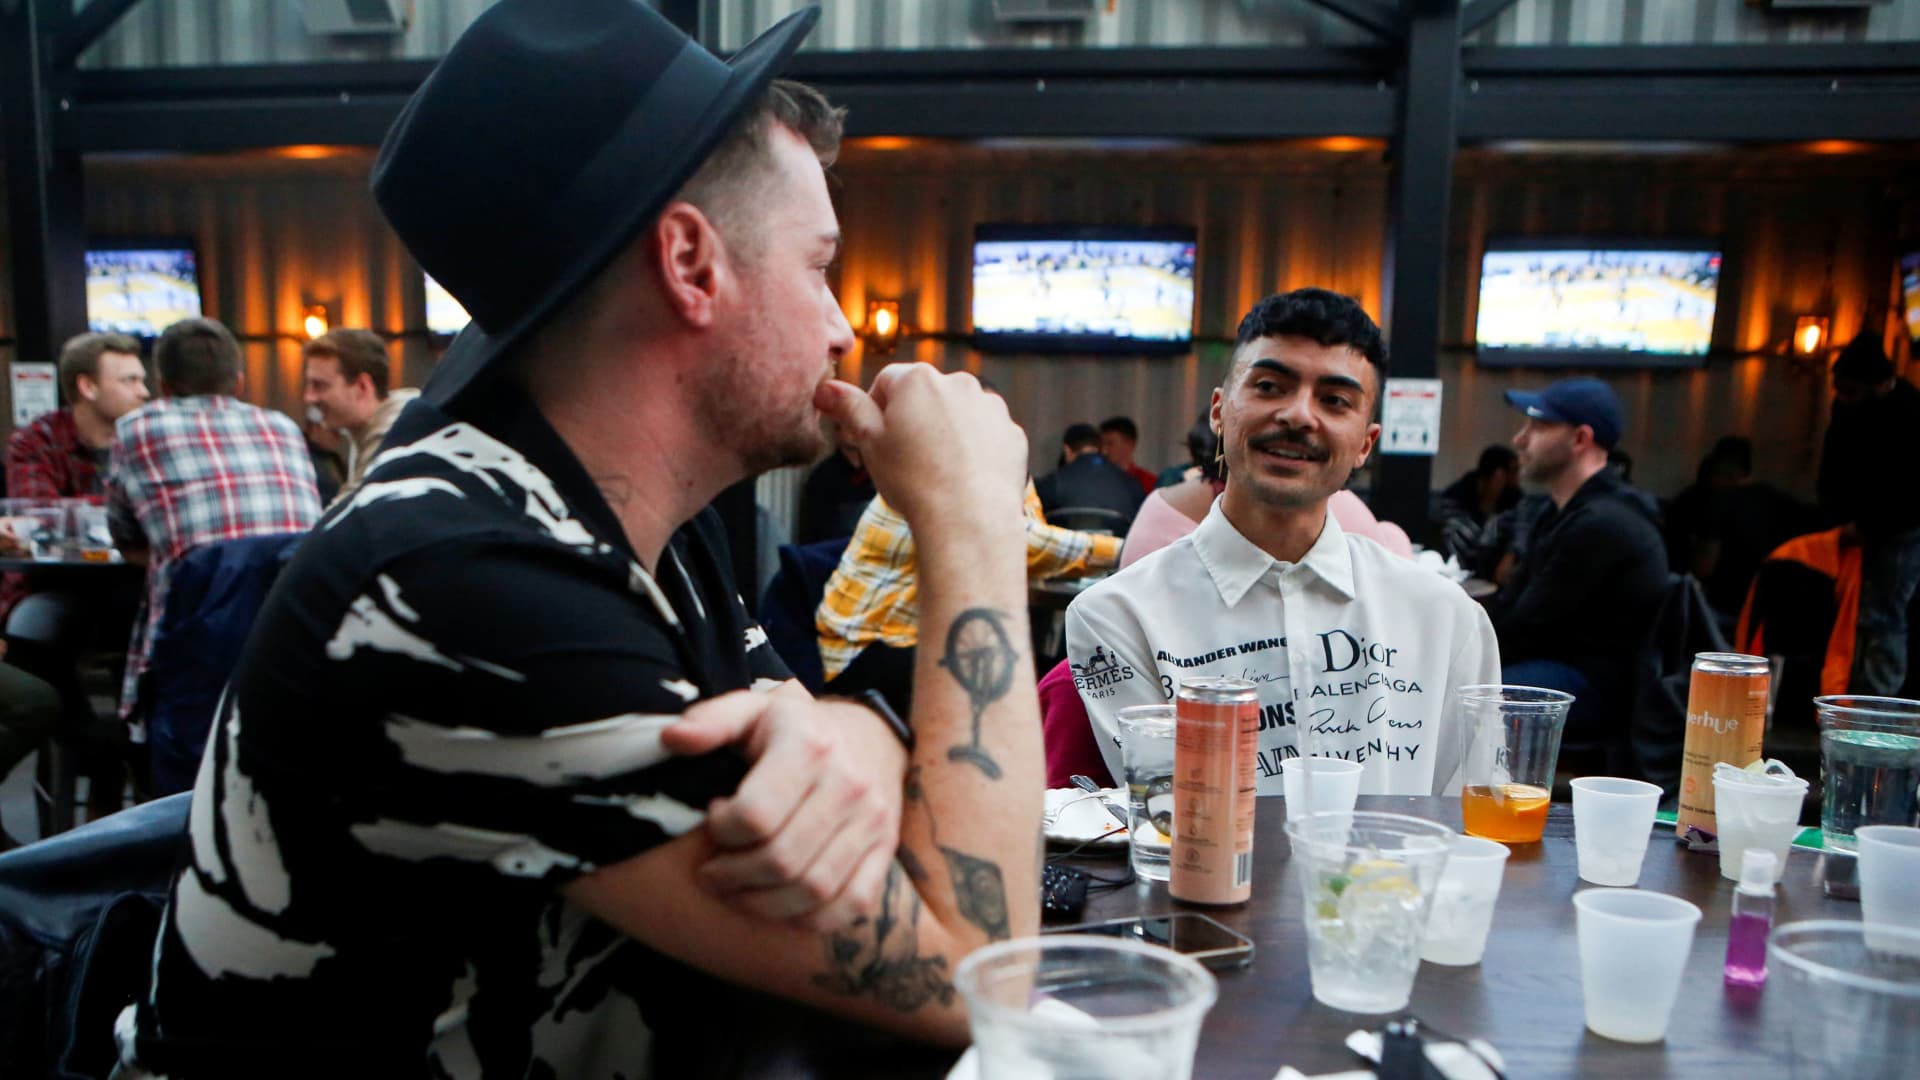 Knyckolas Davis (L) and Matthew Bettencourt celebrate Davis's 35th birthday with friends at Rizzo's Bar & Inn in Wrigleyville as coronavirus disease (COVID-19) restrictions are relaxed in Chicago, Illinois, U.S., March 6, 2021.